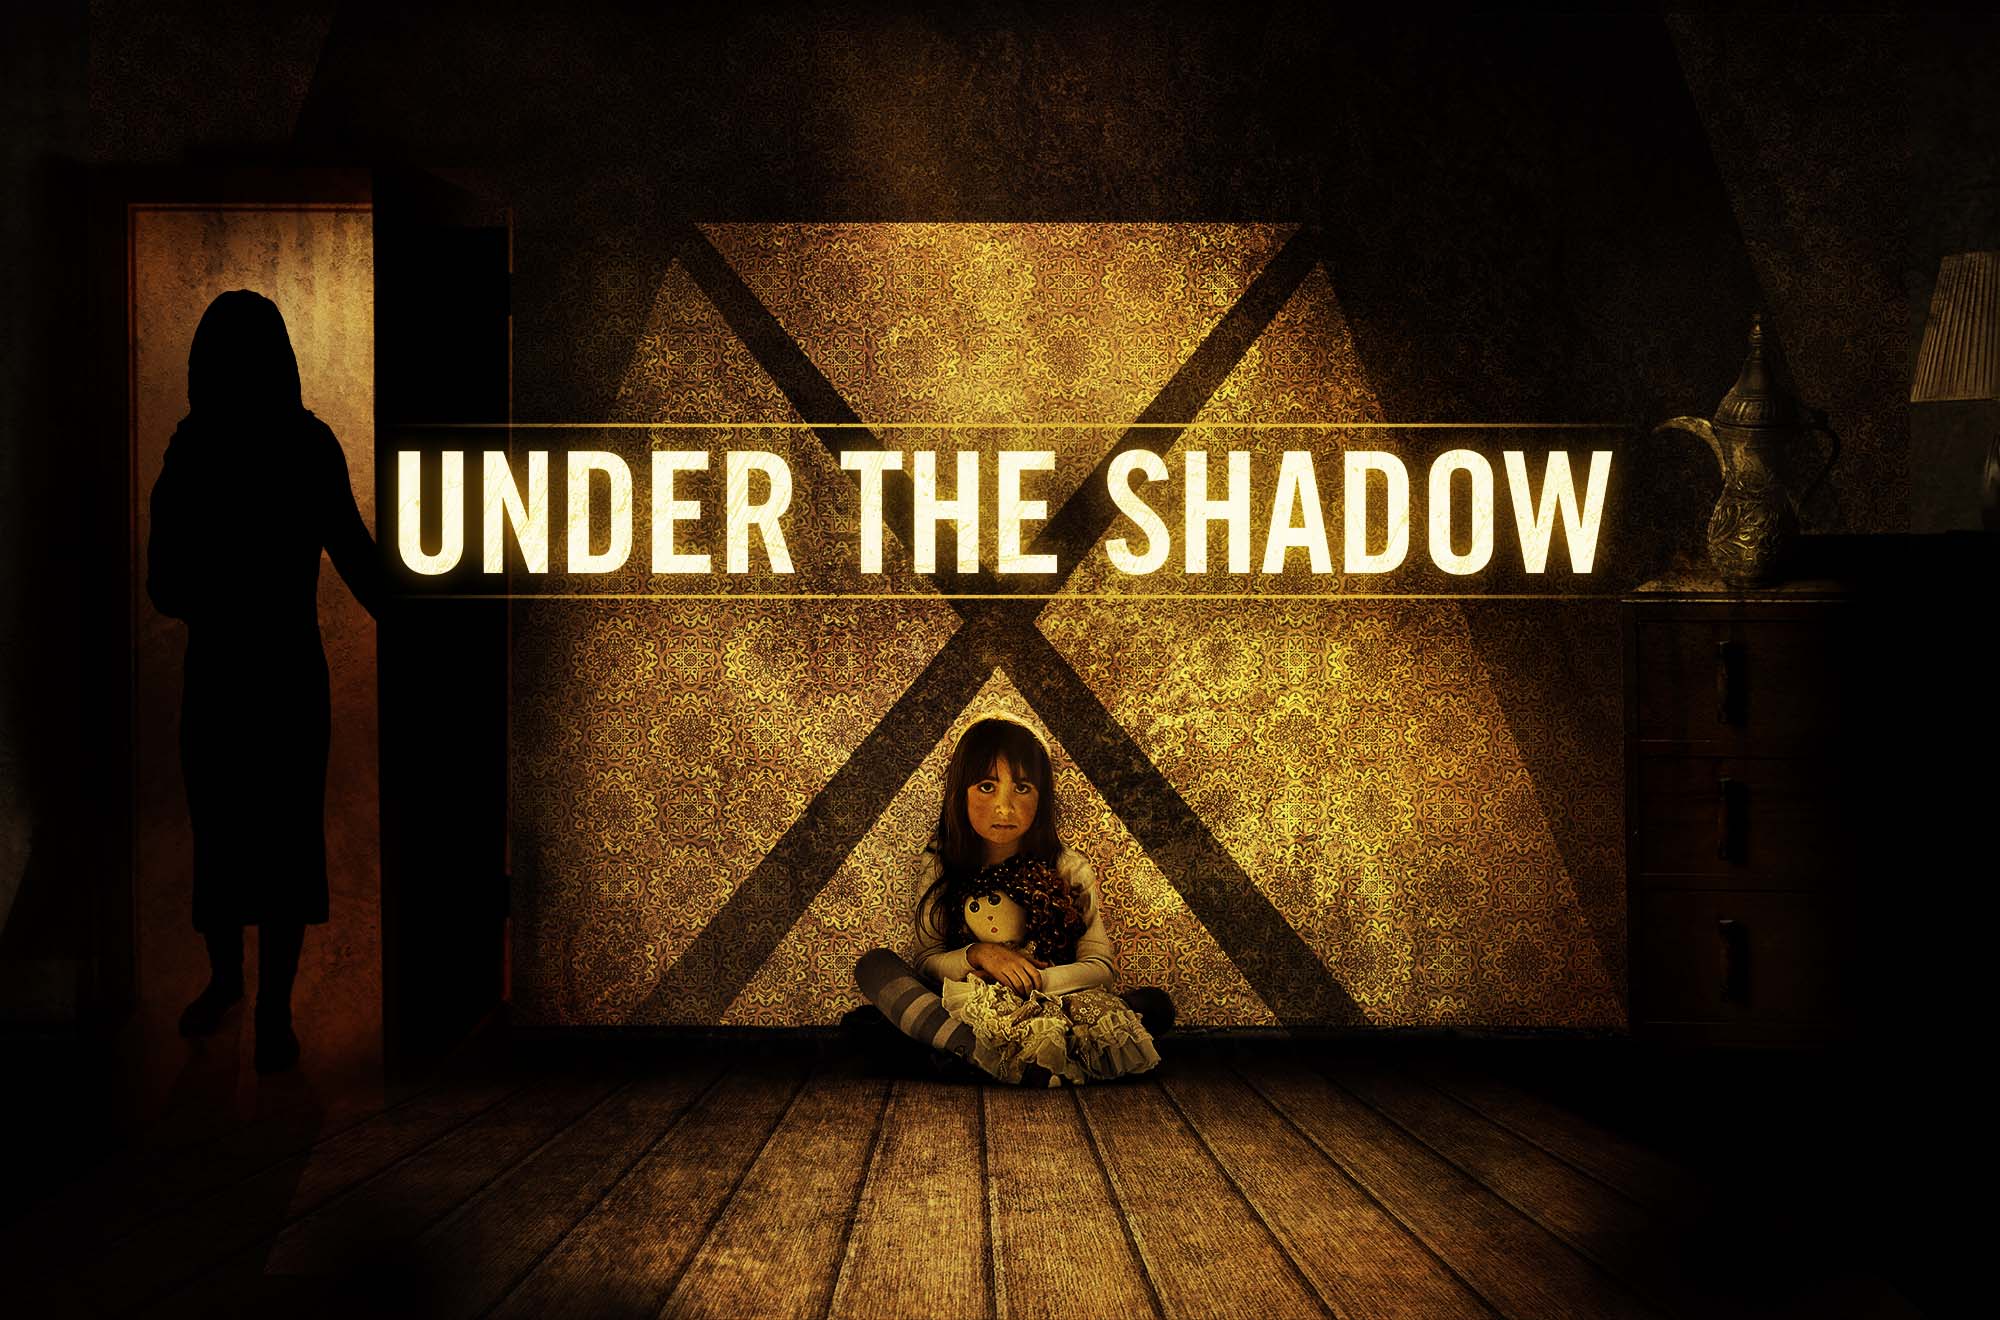 Under the Shadow available on Netflix in January 2017.